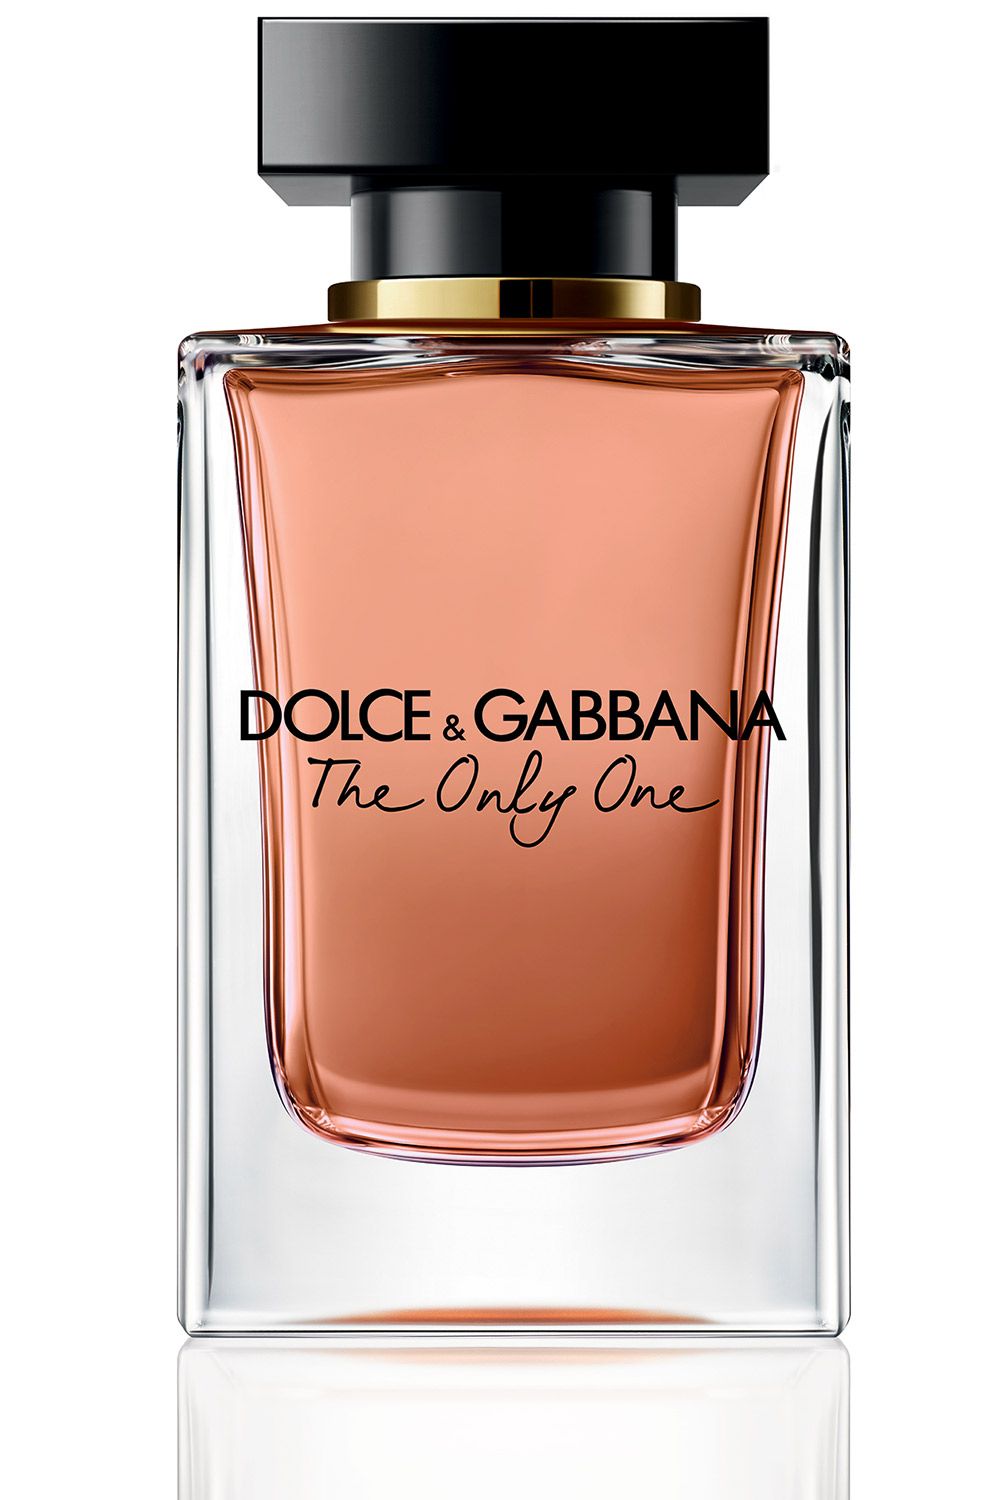 the only one dolce gabbana actress